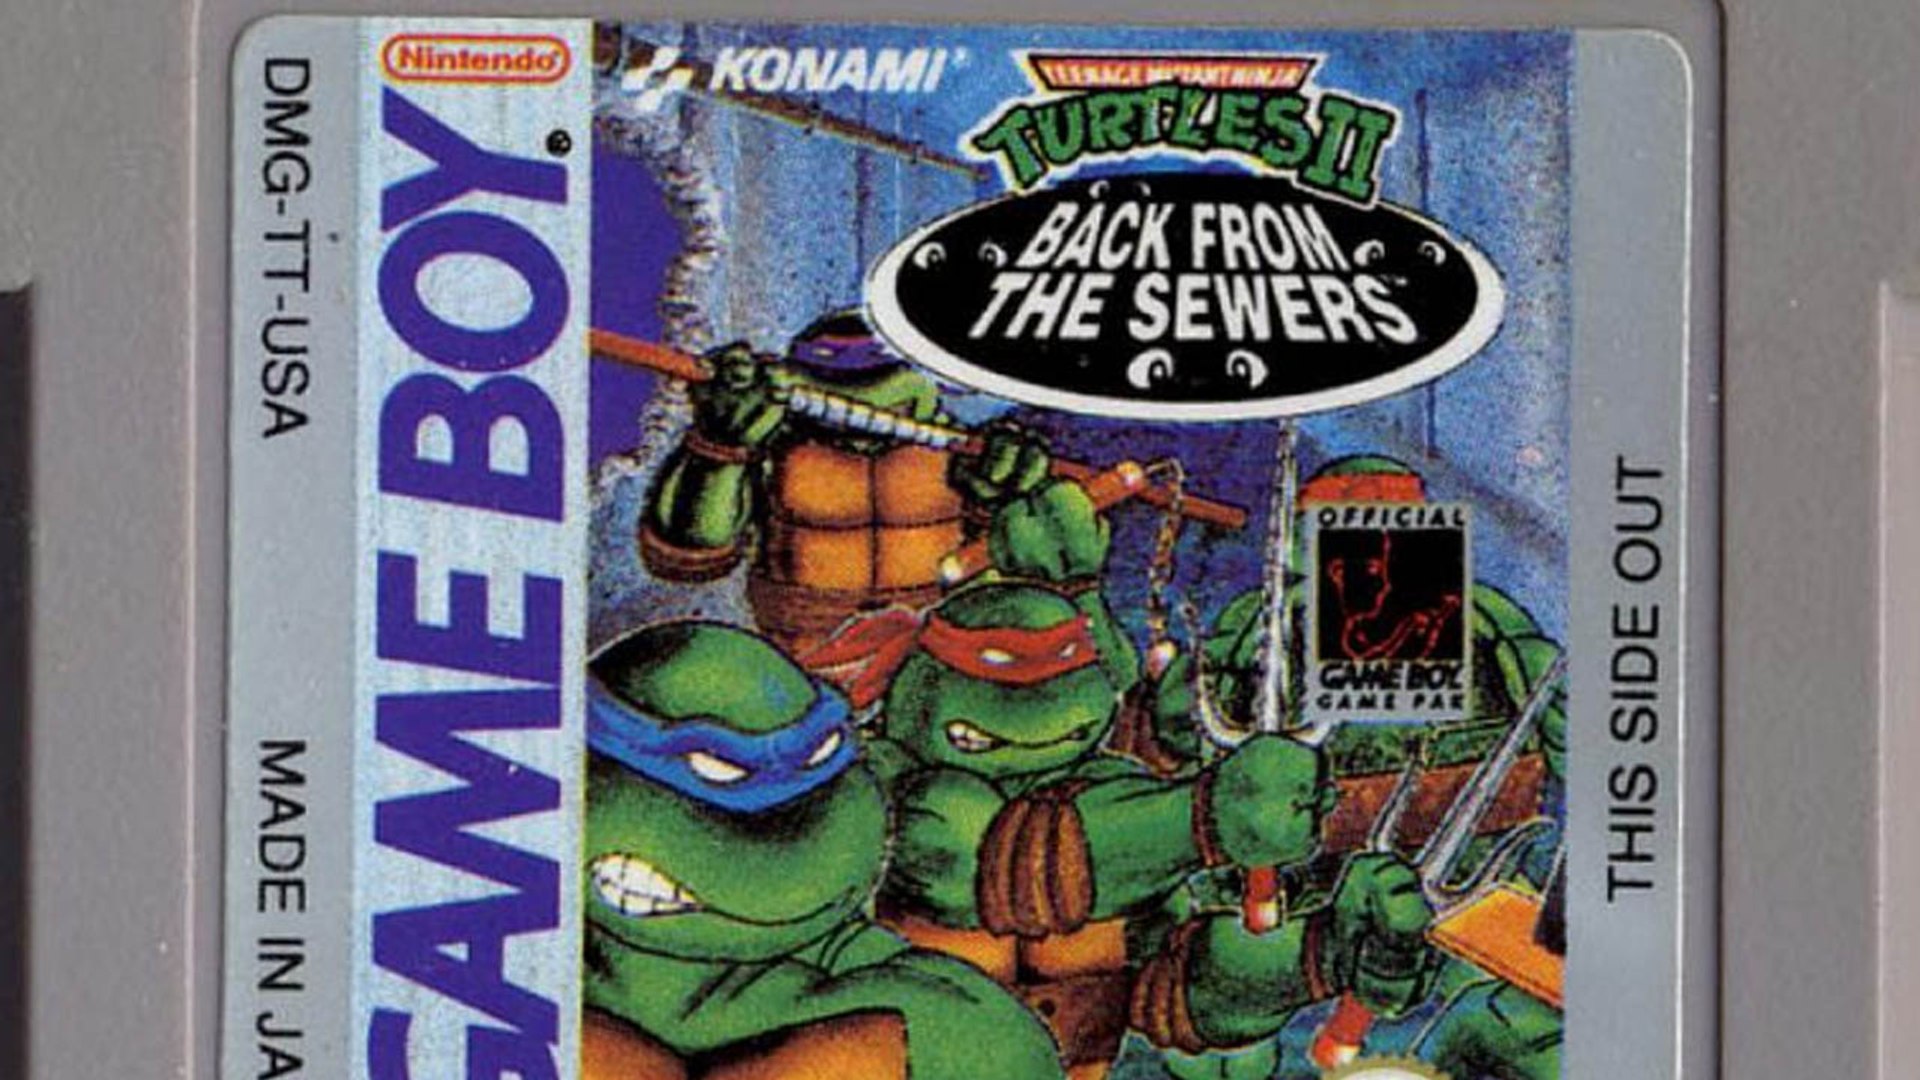 CGR Undertow - TEENAGE MUTANT NINJA TURTLES II: BACK FROM THE SEWERS review  for Game Boy - video Dailymotion